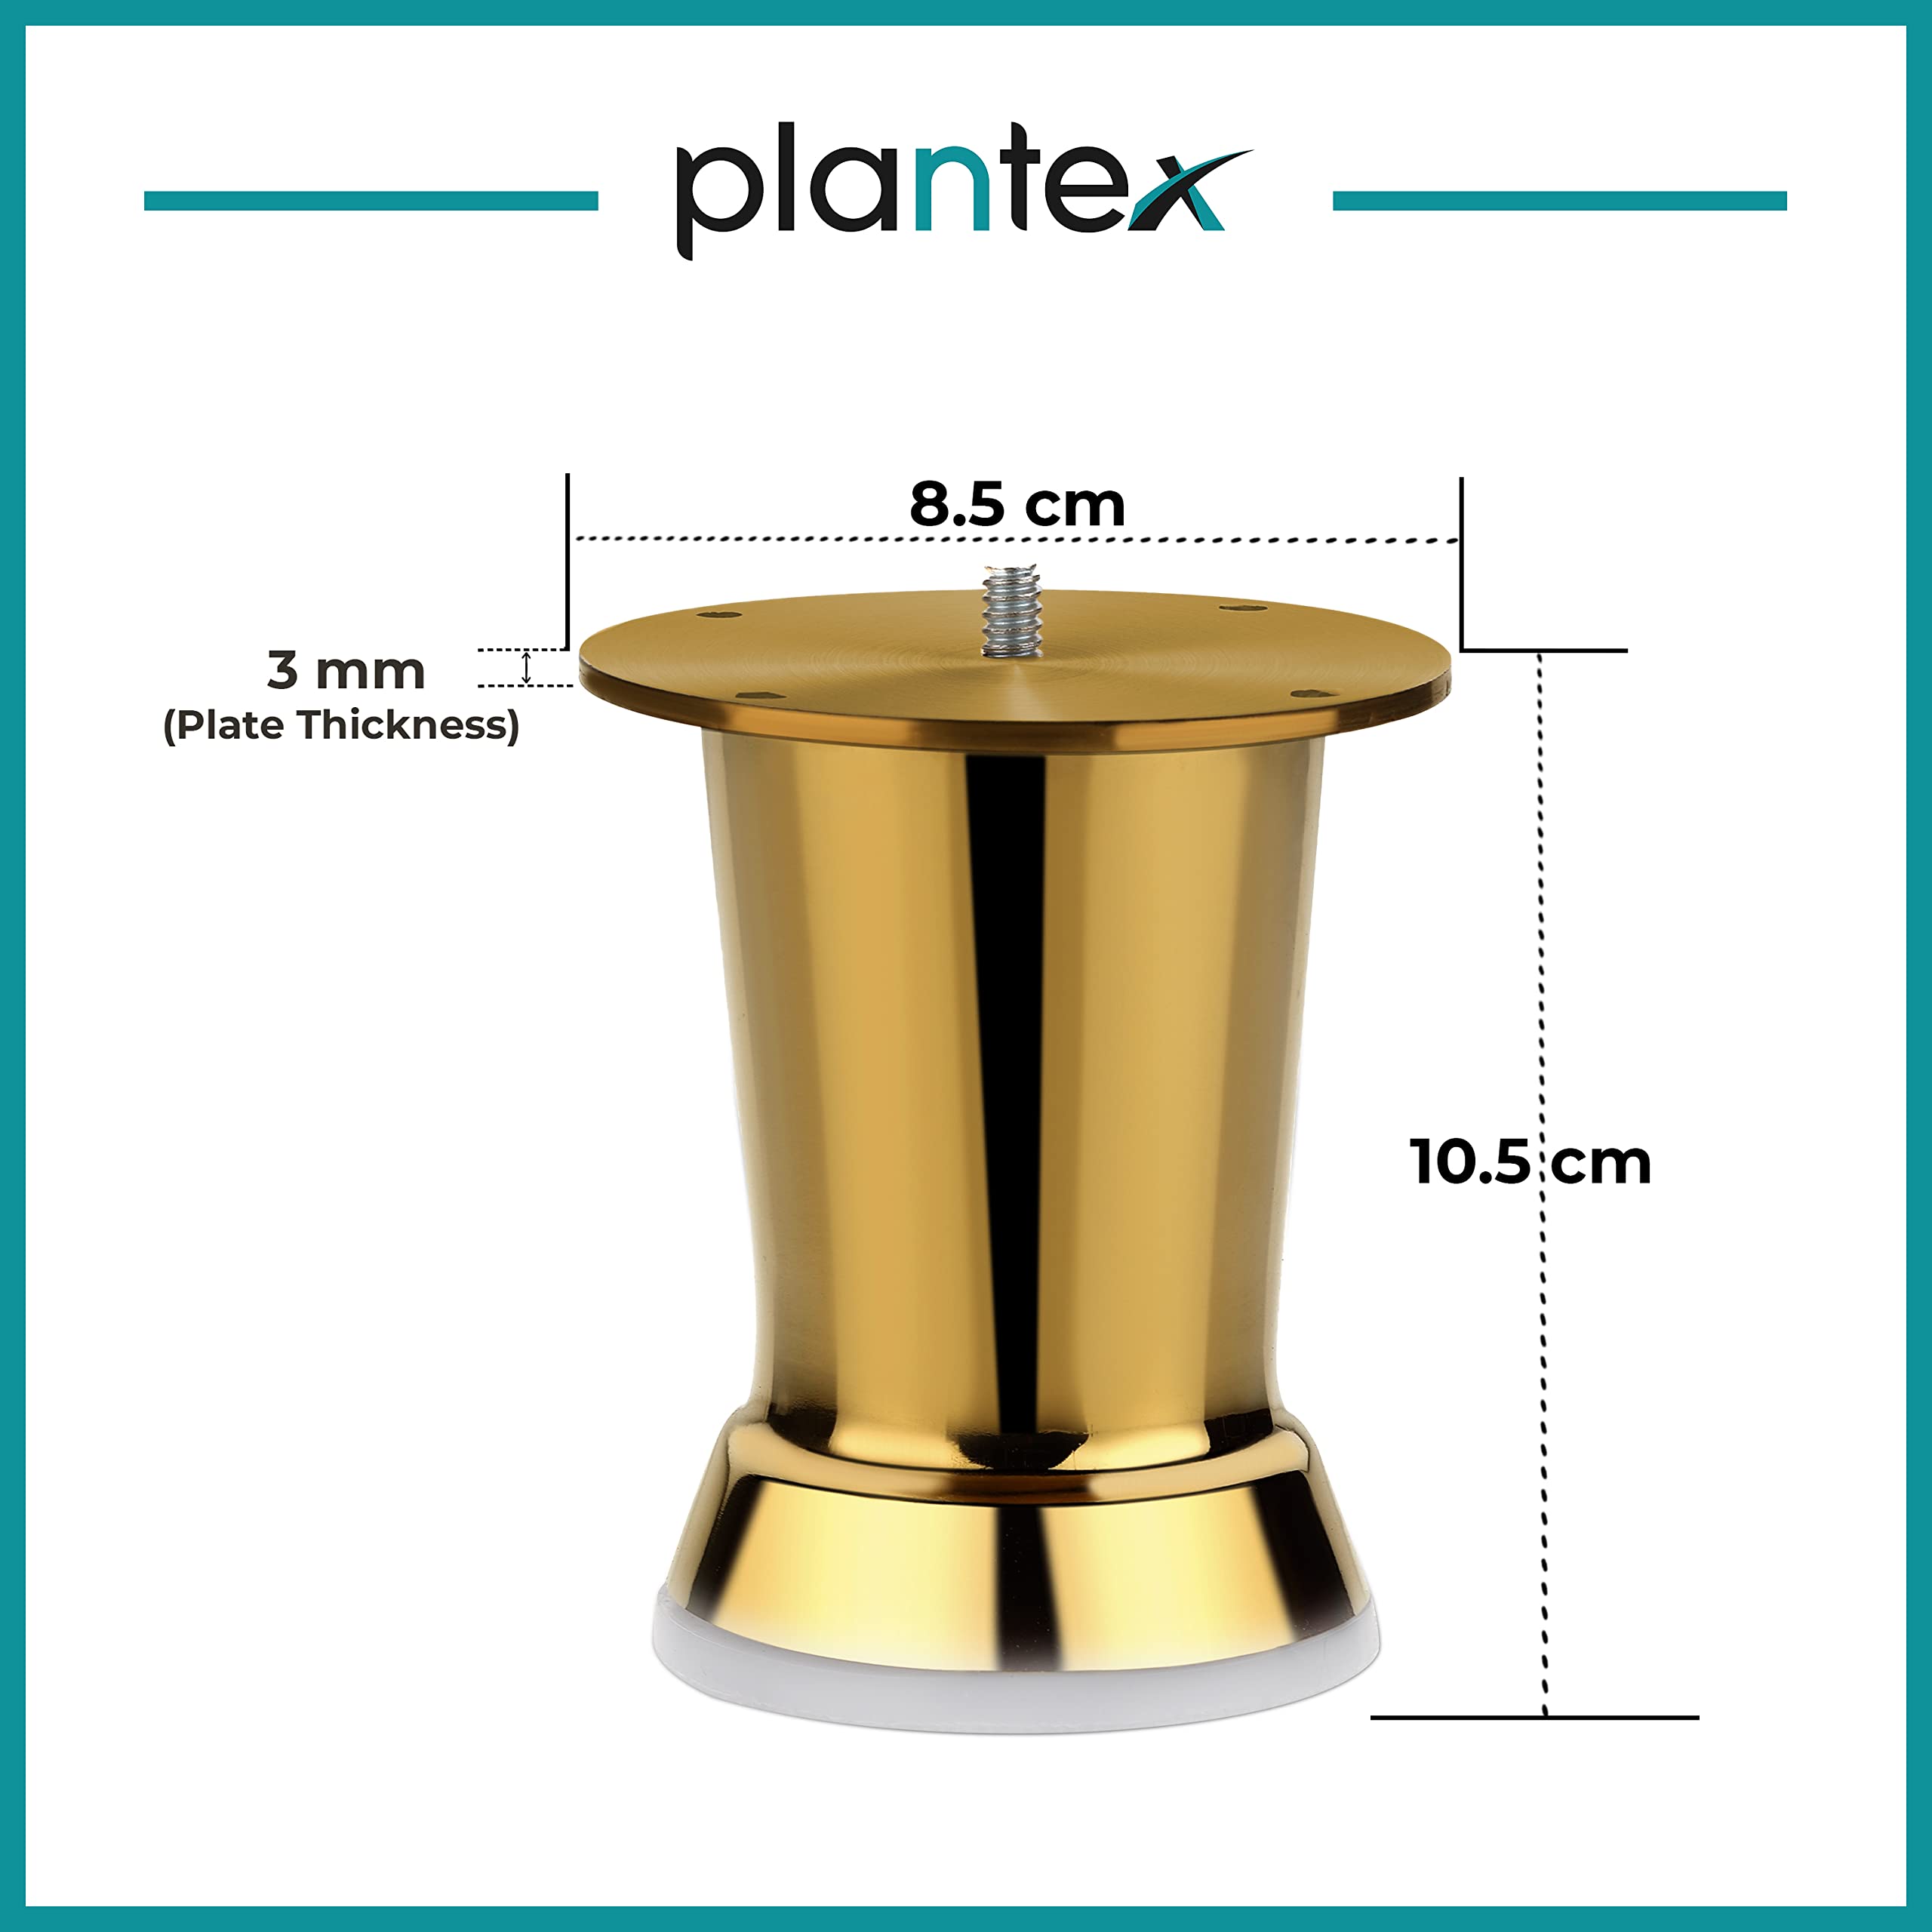 Plantex Heavy Duty Stainless Steel 4 inch Sofa Leg/Bed Furniture Leg Pair for Home Furnitures (DTS-51, Gold) – Pcs - 8